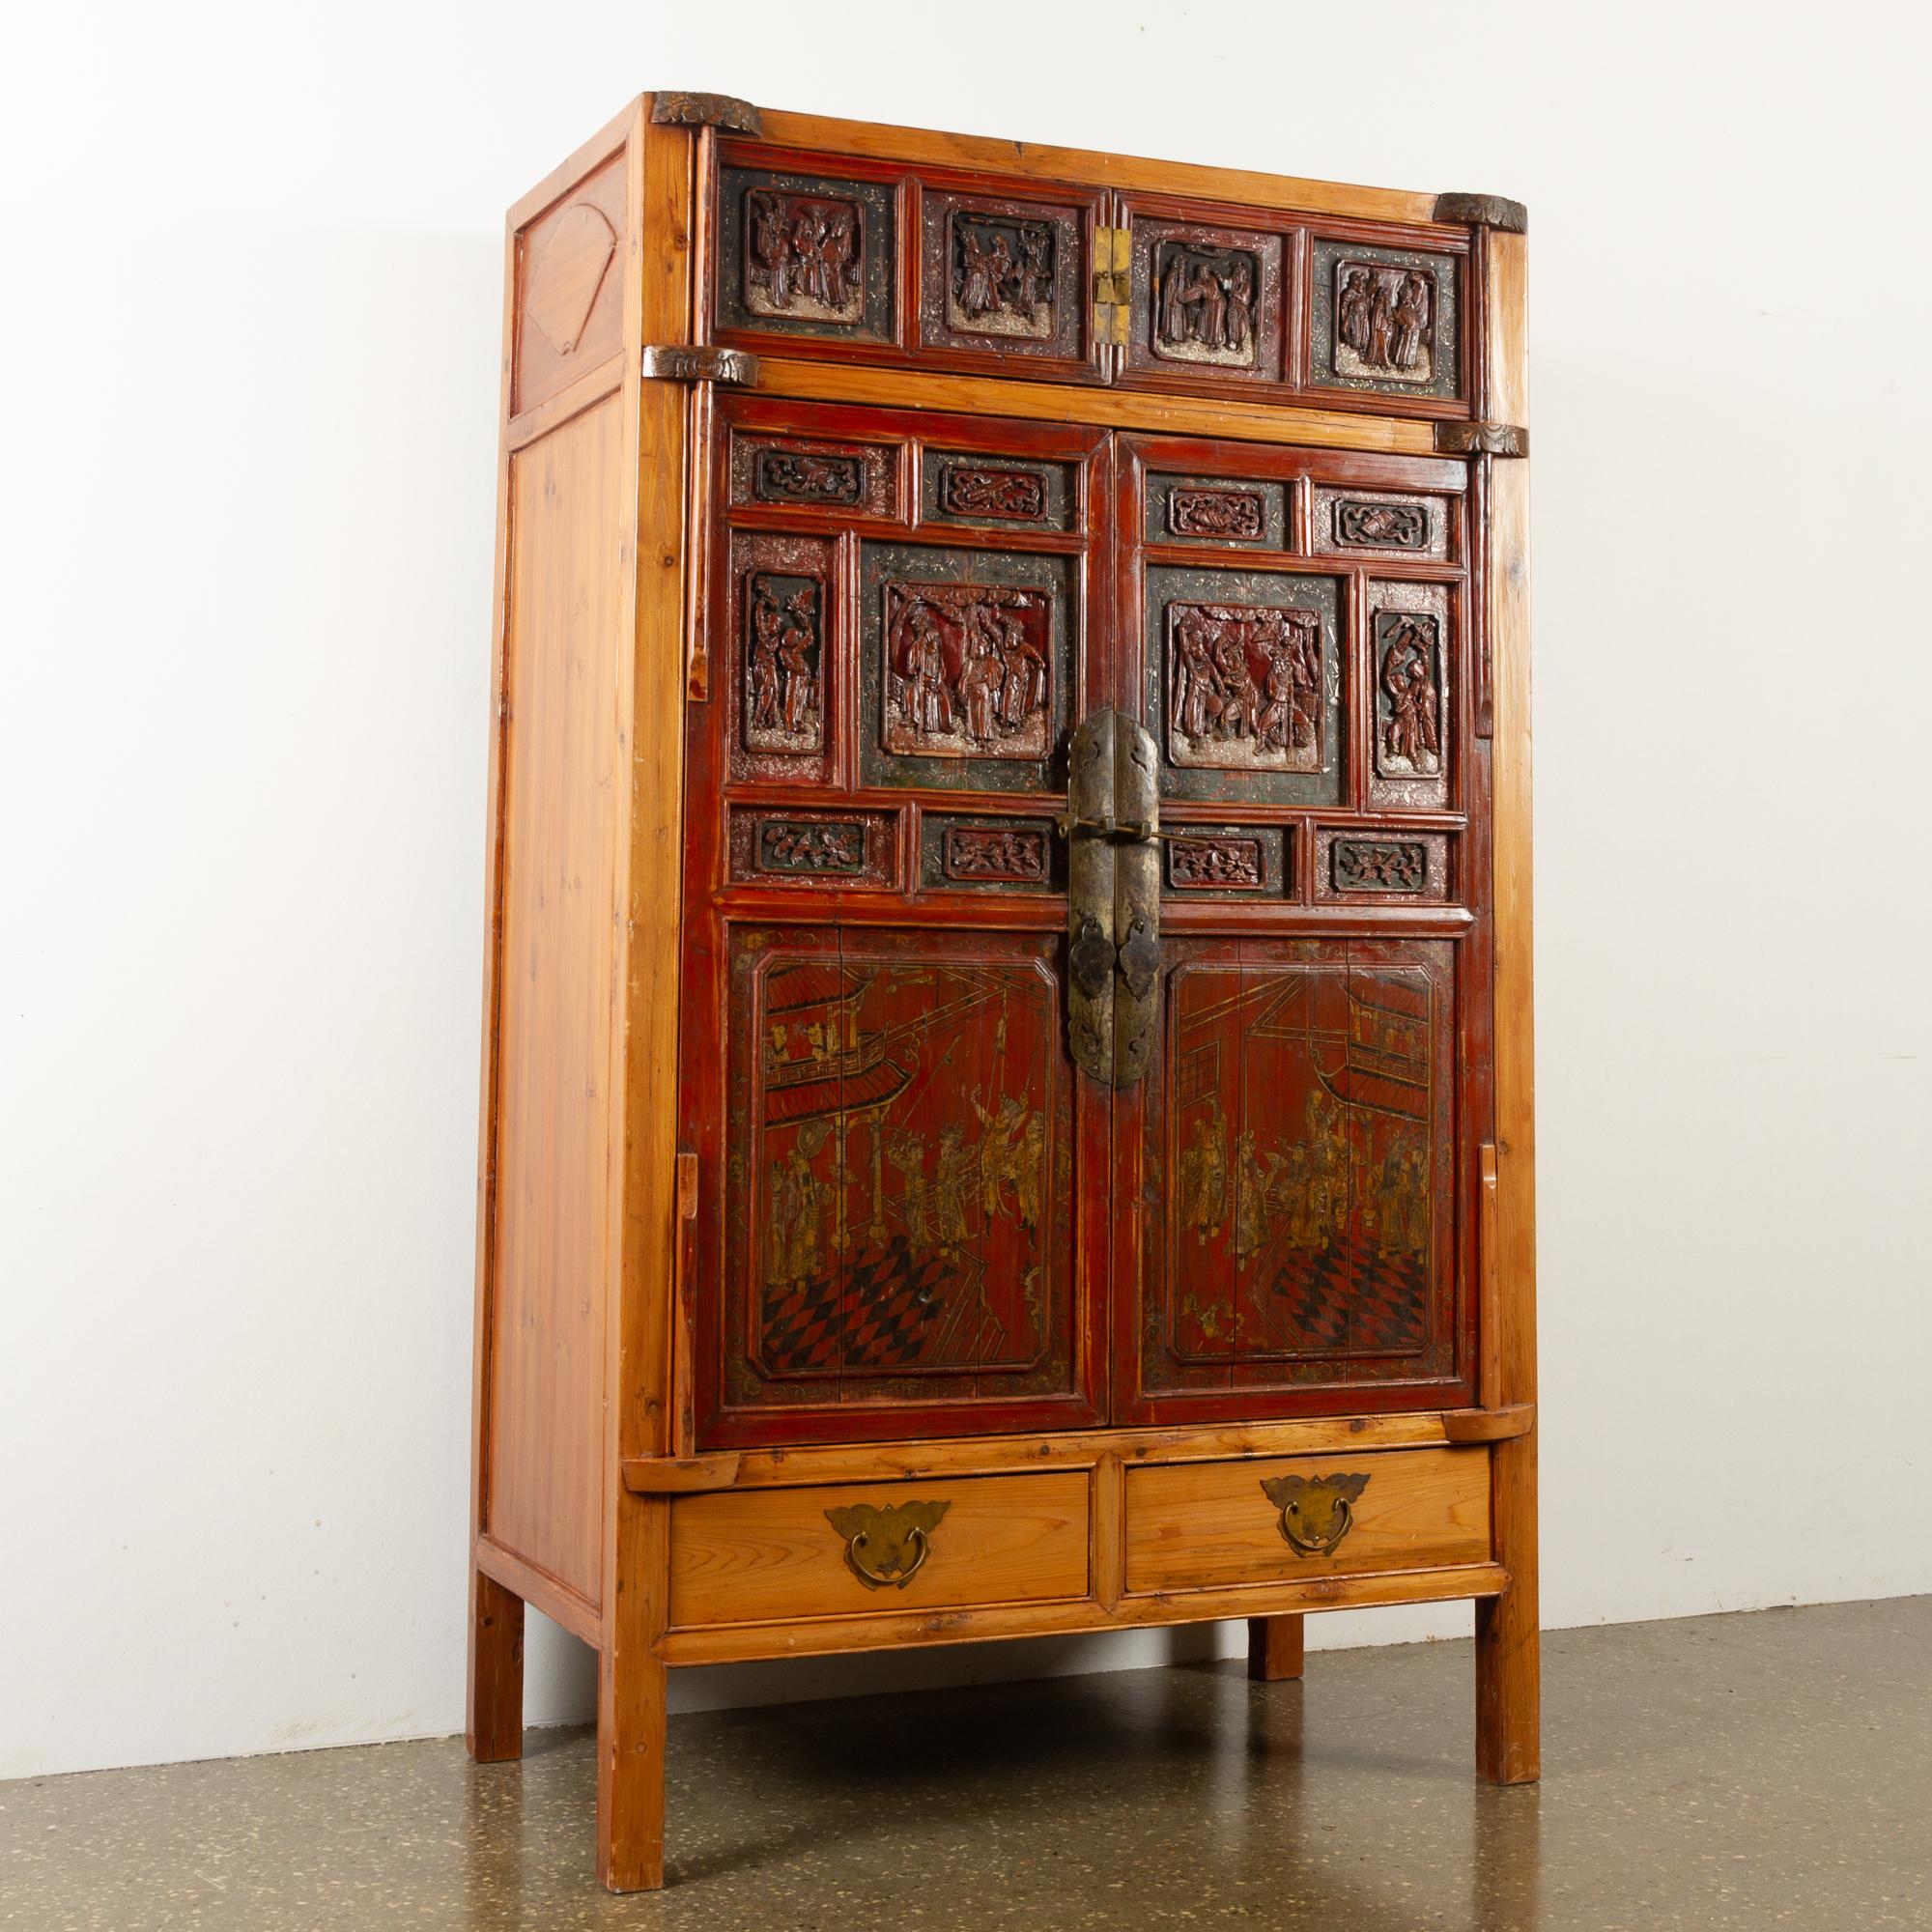 Vintage Chinese cabinet, 1950s
This beautiful wardrobe was bought in China and brought to Denmark in the 1950s. The carvings and hand painted panels appear to be much older, and is most likely from another piece of furniture that was reused